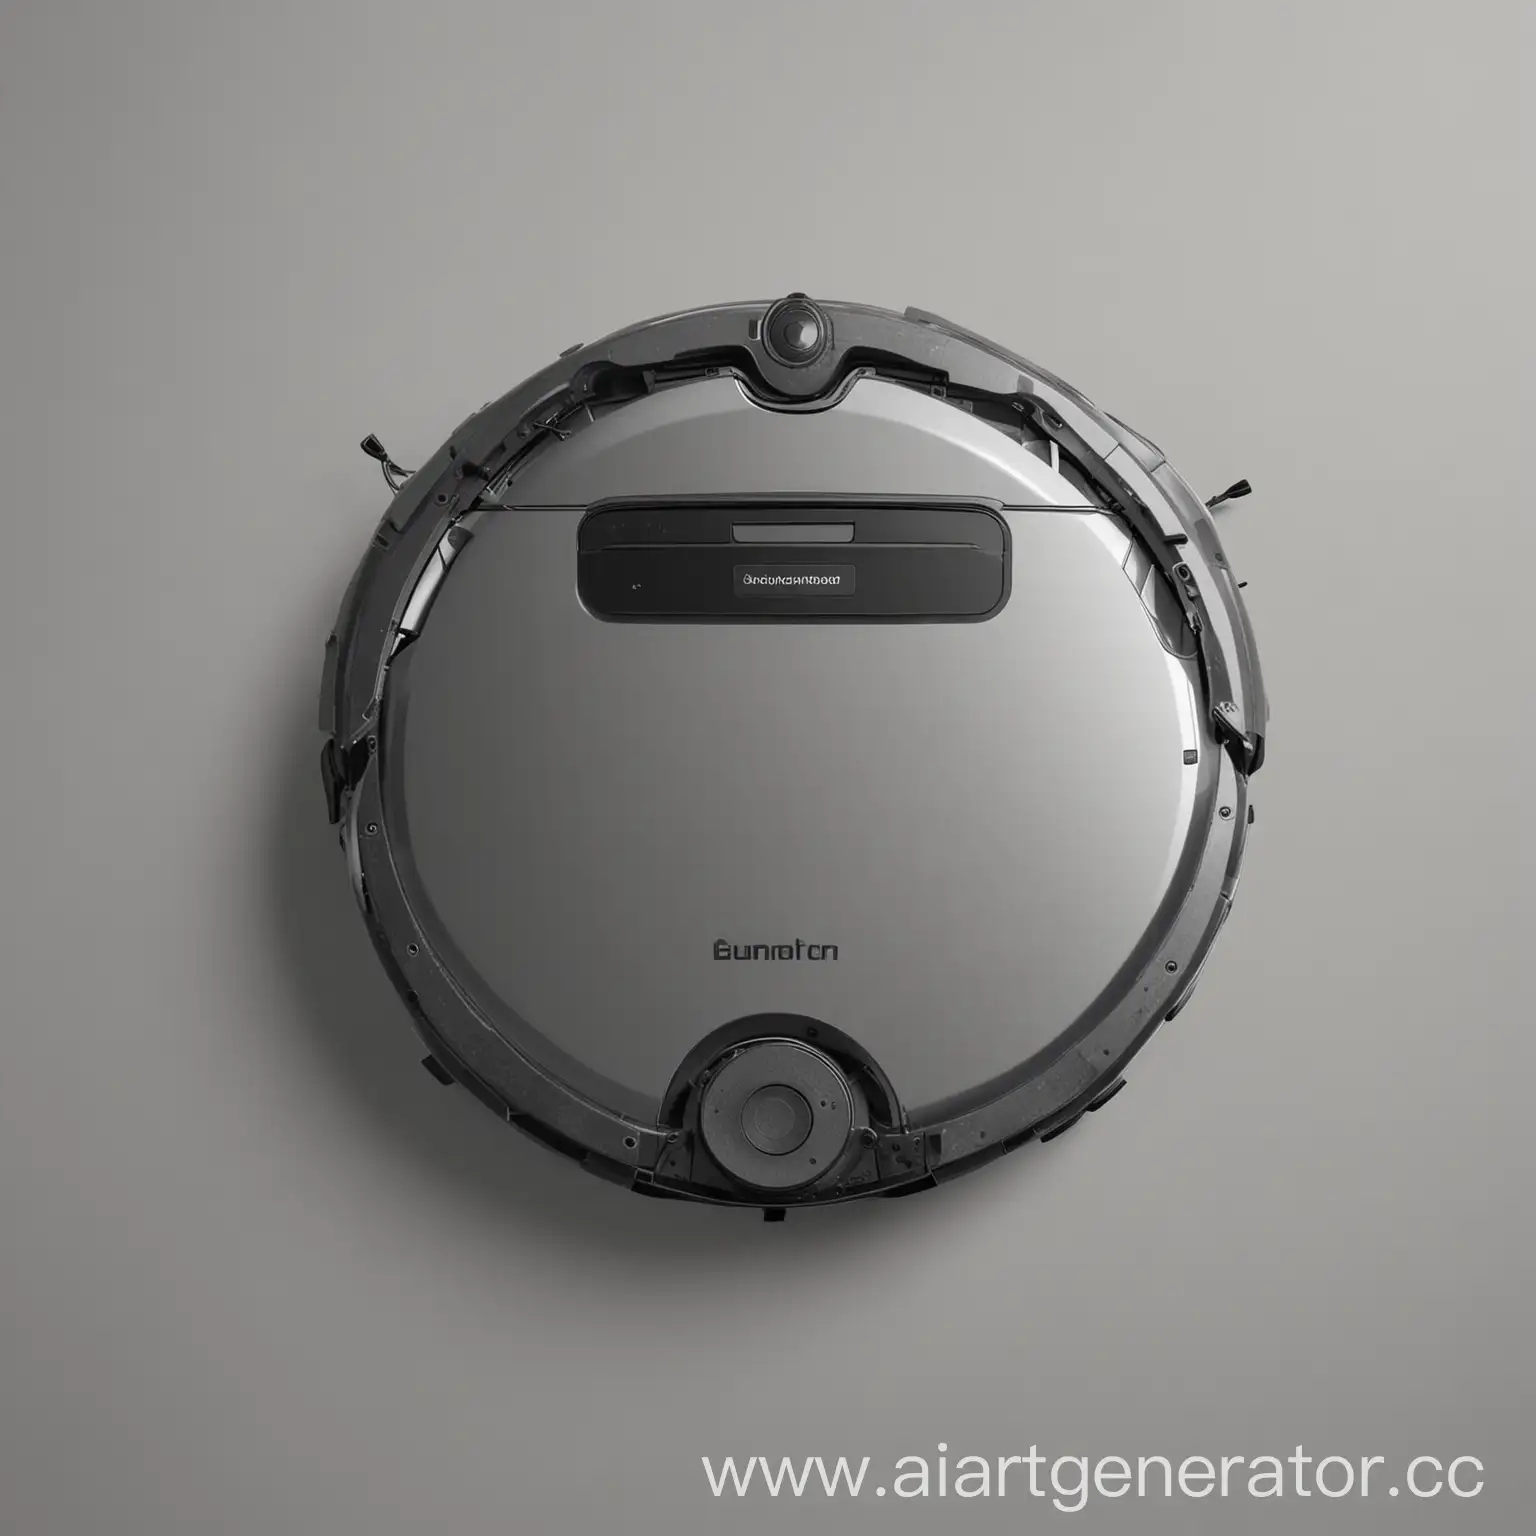 Robot-Vacuum-Cleaner-in-Various-Angles